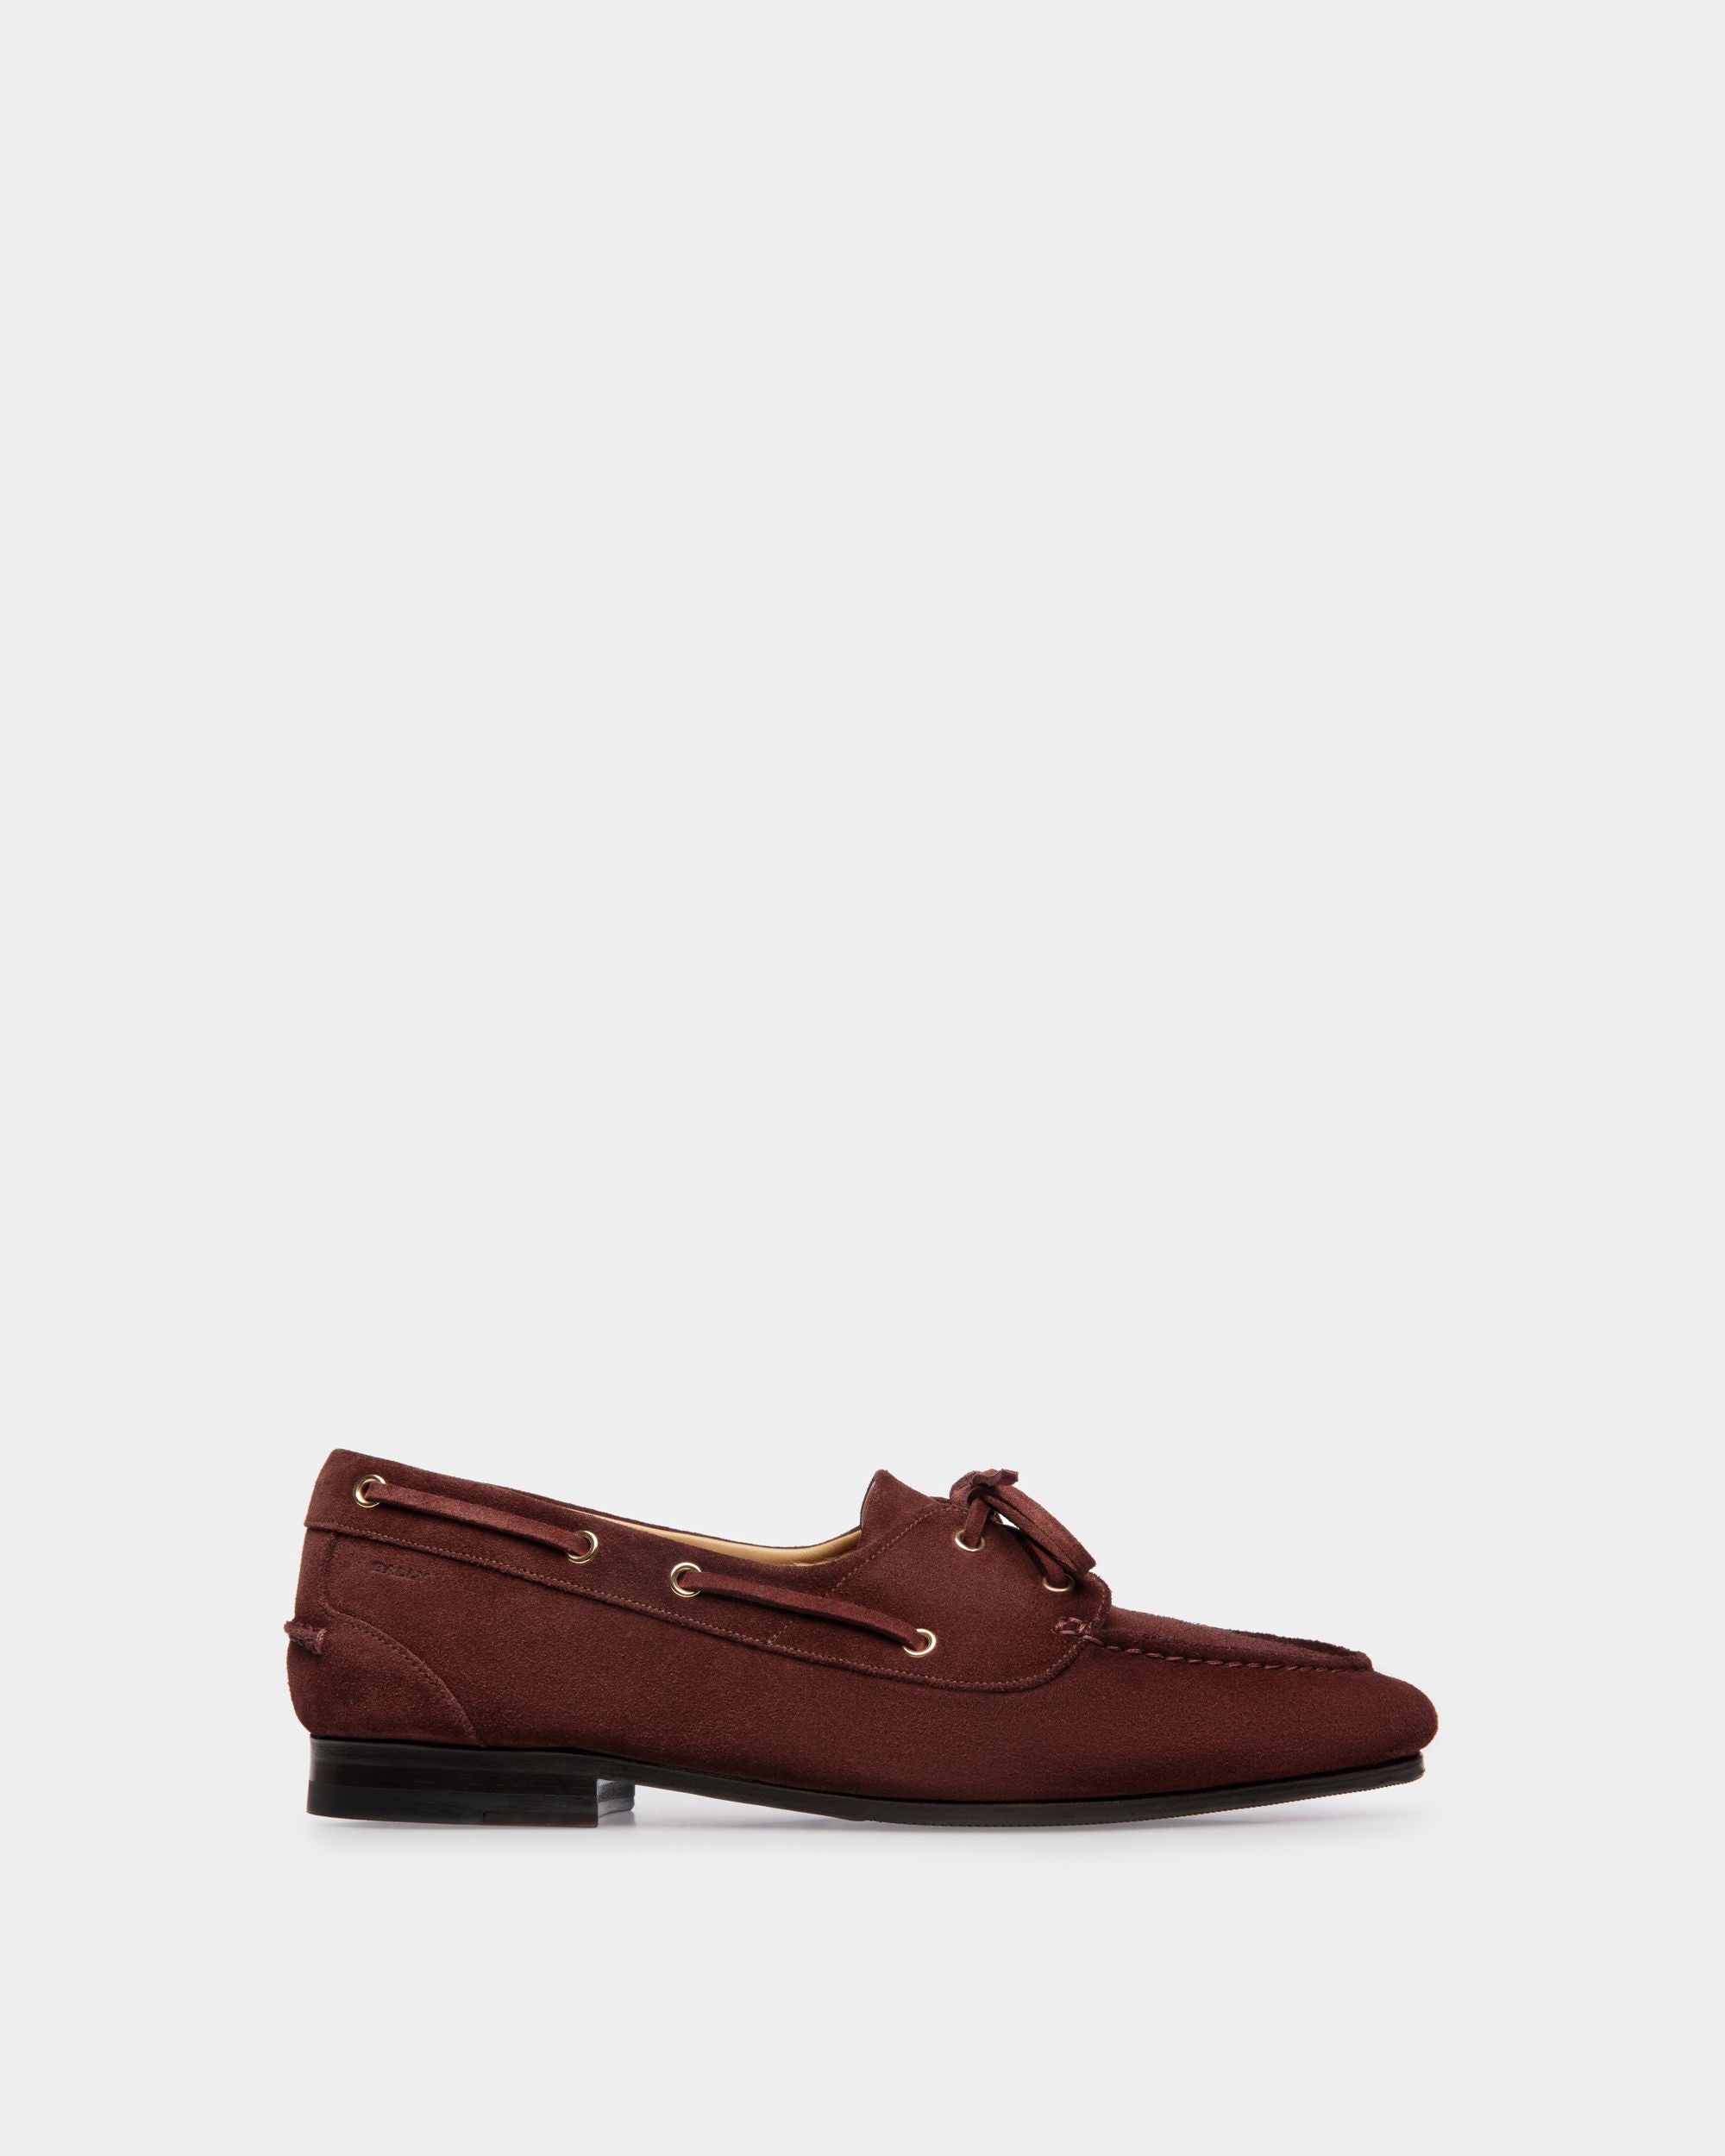 Plume | Men's Moccasin in Chestnut Brown Suede| Bally | Still Life Side